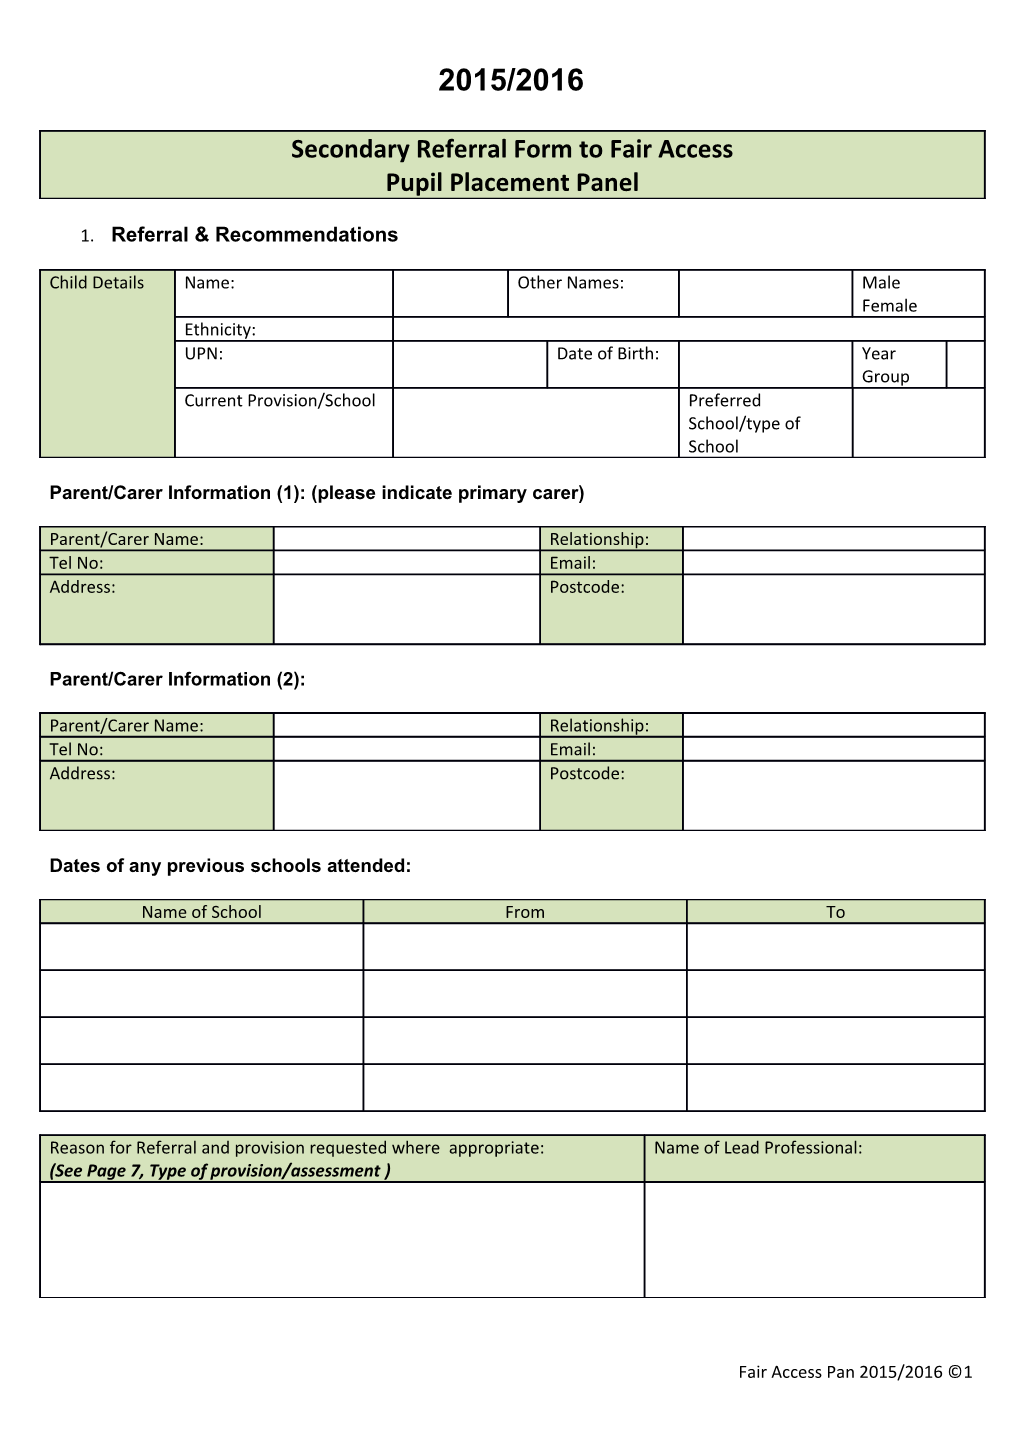 Secondary Referral Form 2015-2016